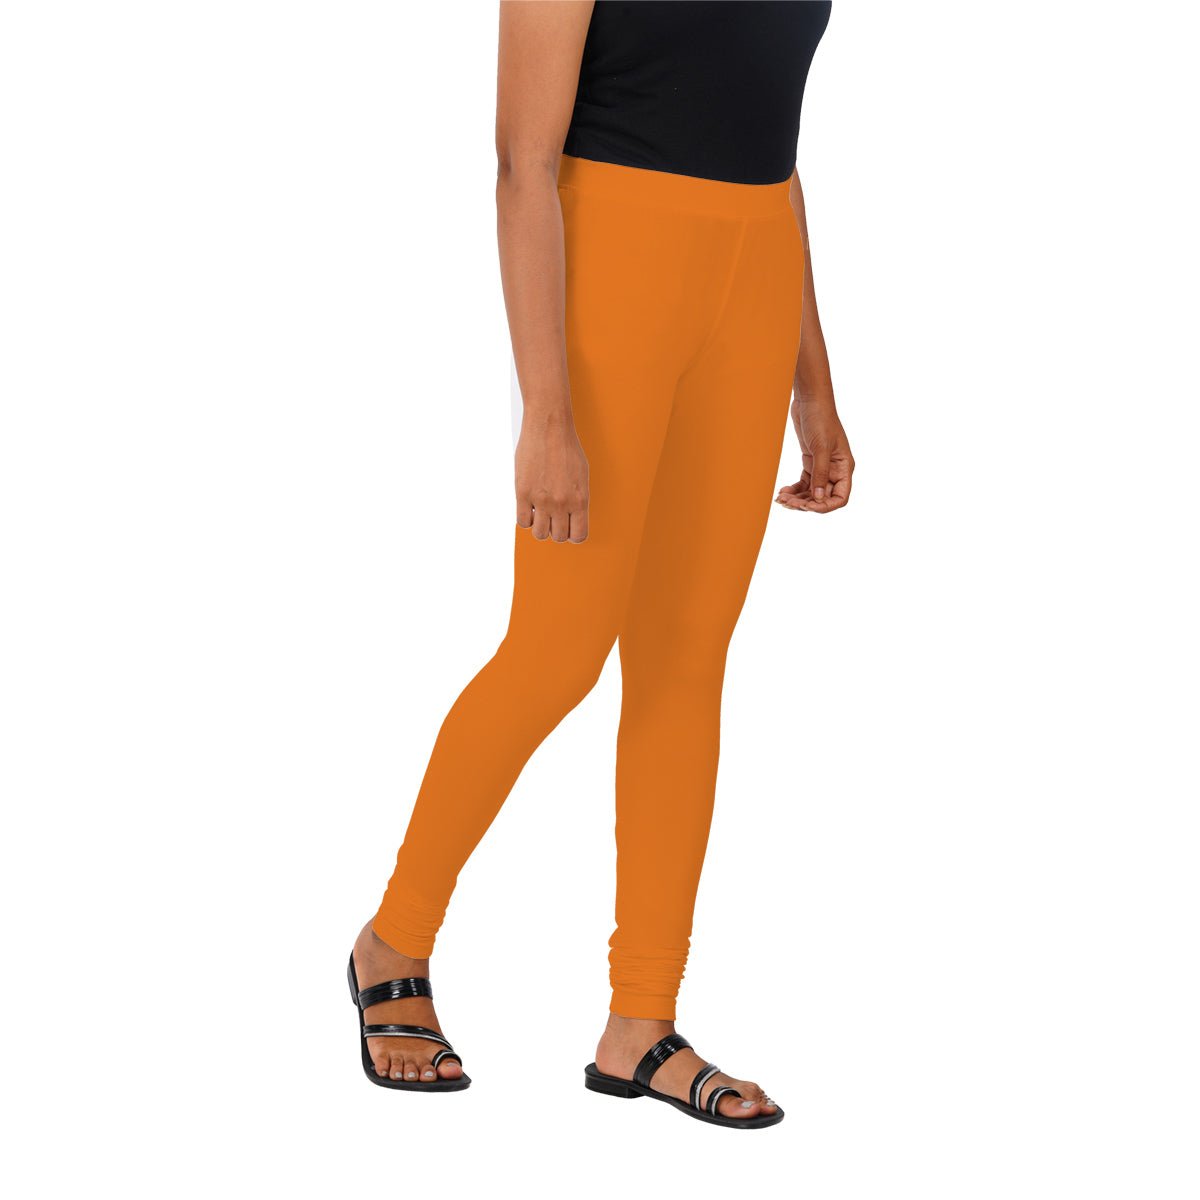 Premium Leggings as pants: Elevate Your Style and Comfort